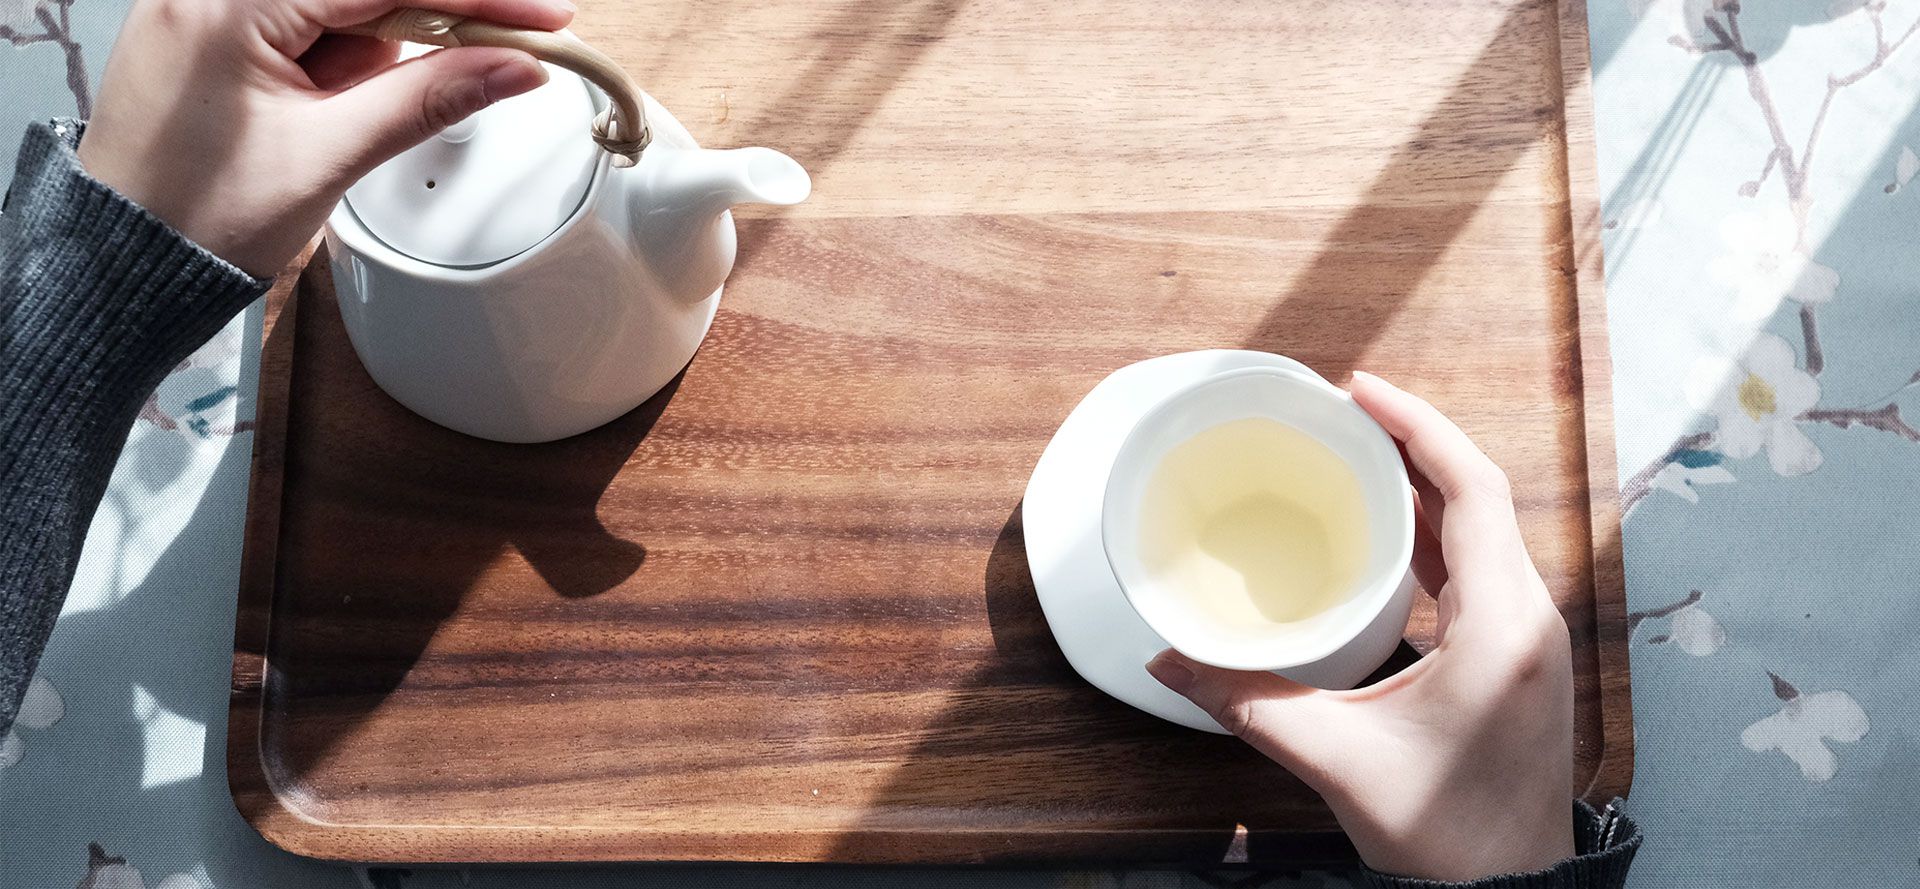 White Tea in a Cup.